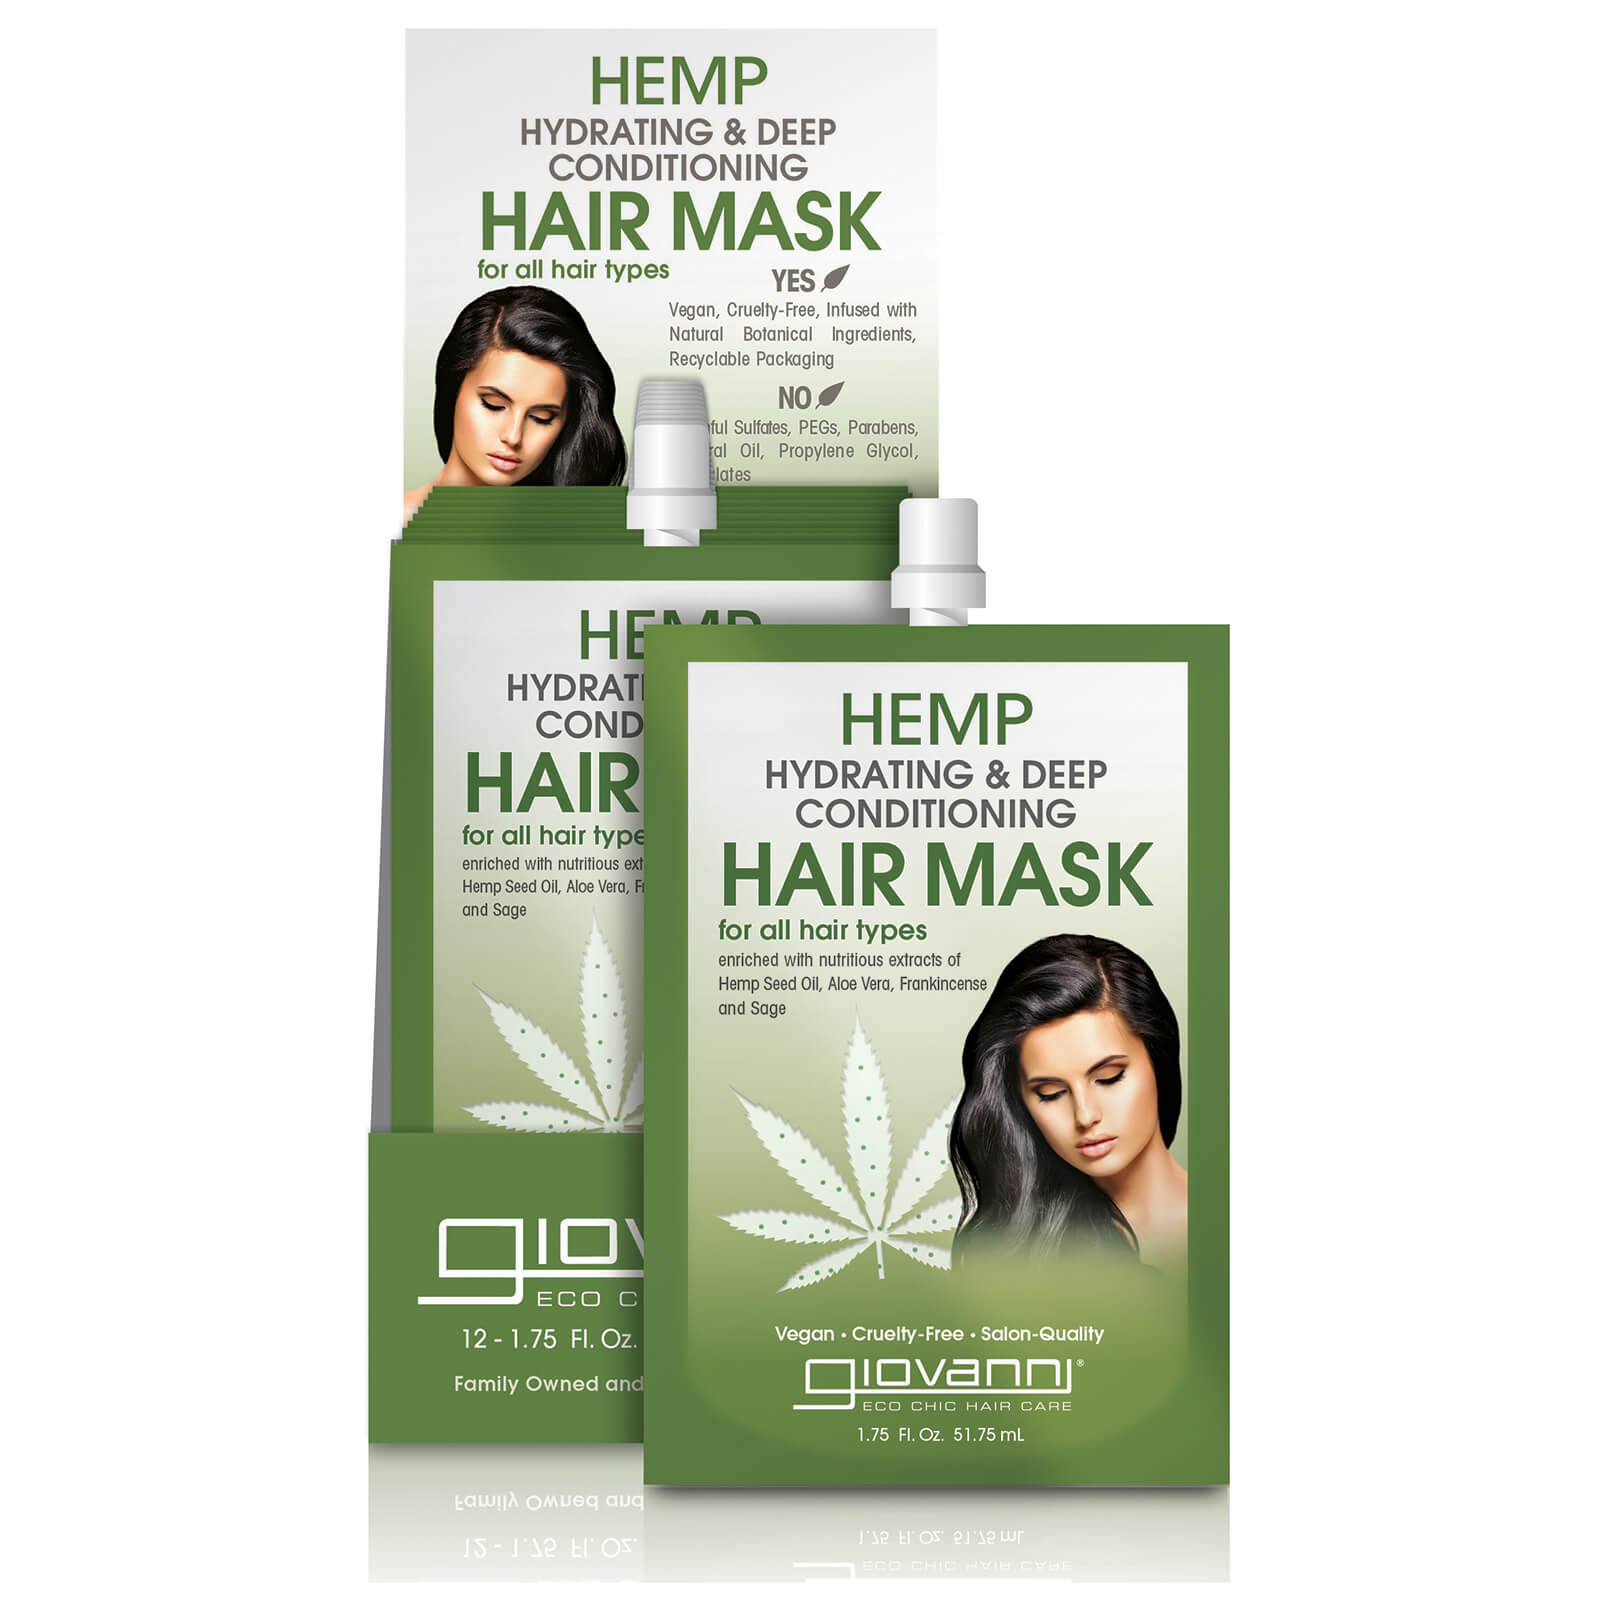 Photos - Facial Mask Giovanni Hemp Hydrating and Deep Conditioning Hair Mask  4299 (Pack of 12)